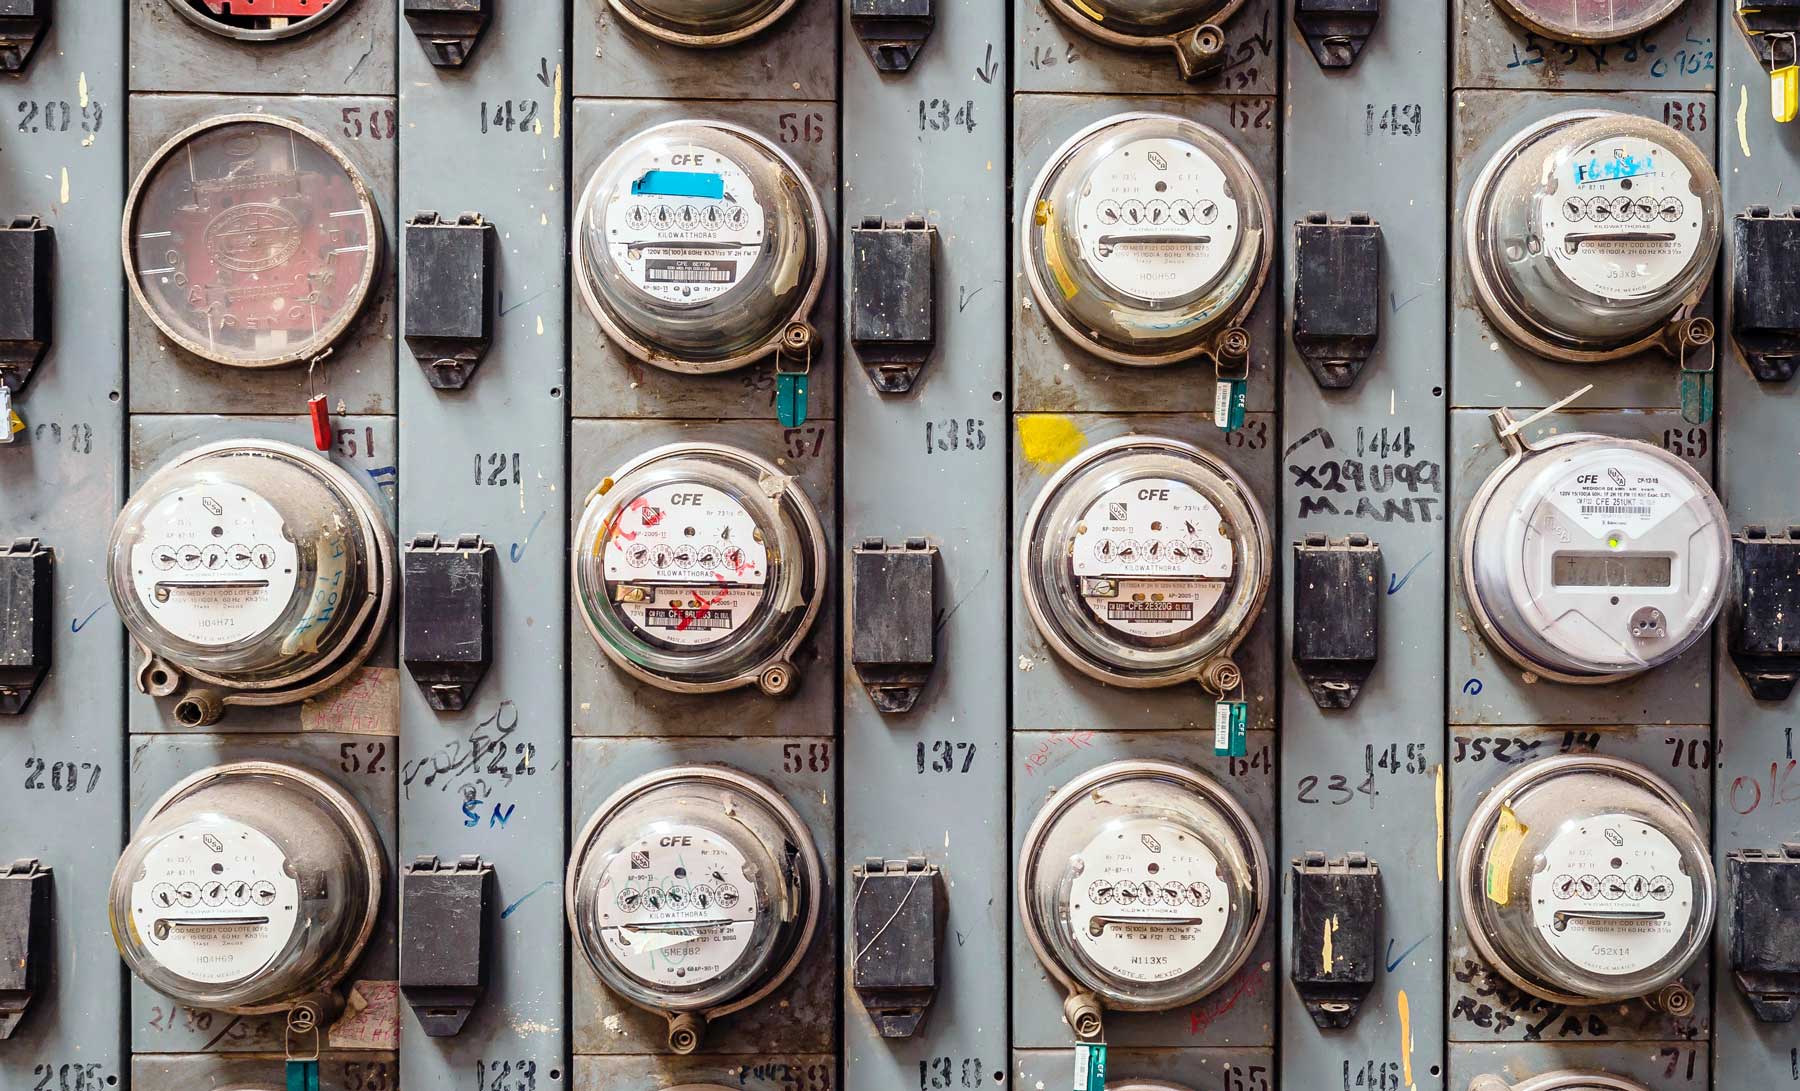 technology can improve data capture processes for utility companies